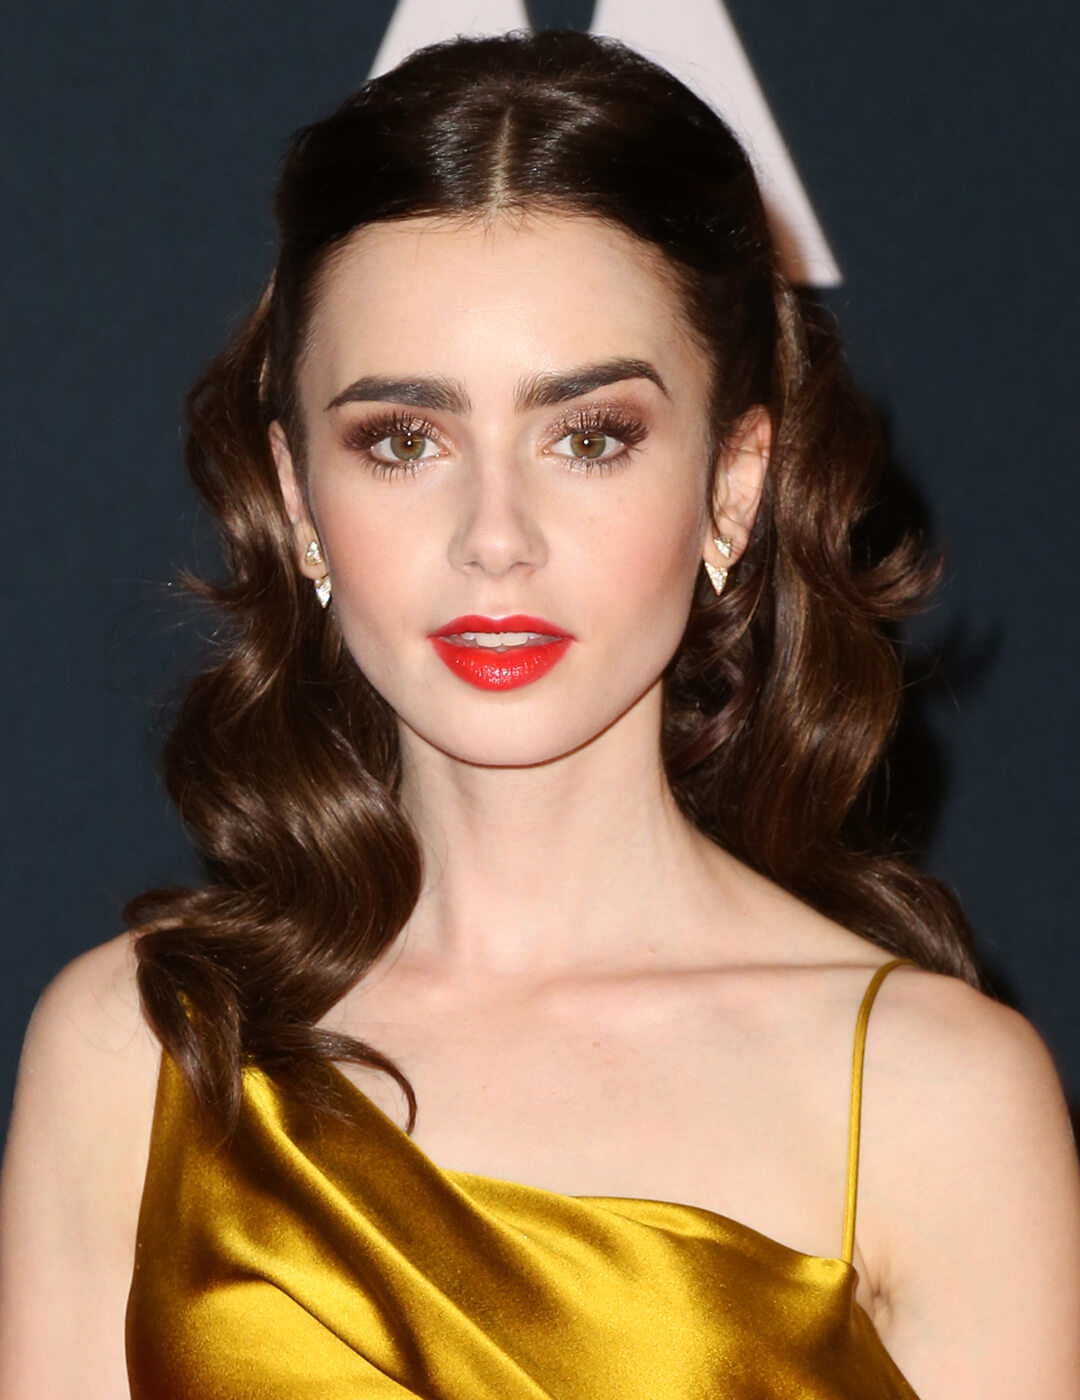 Lily Collins looking elegant in a neutral makeup look and red lips, golden satin dress, and wavy hair